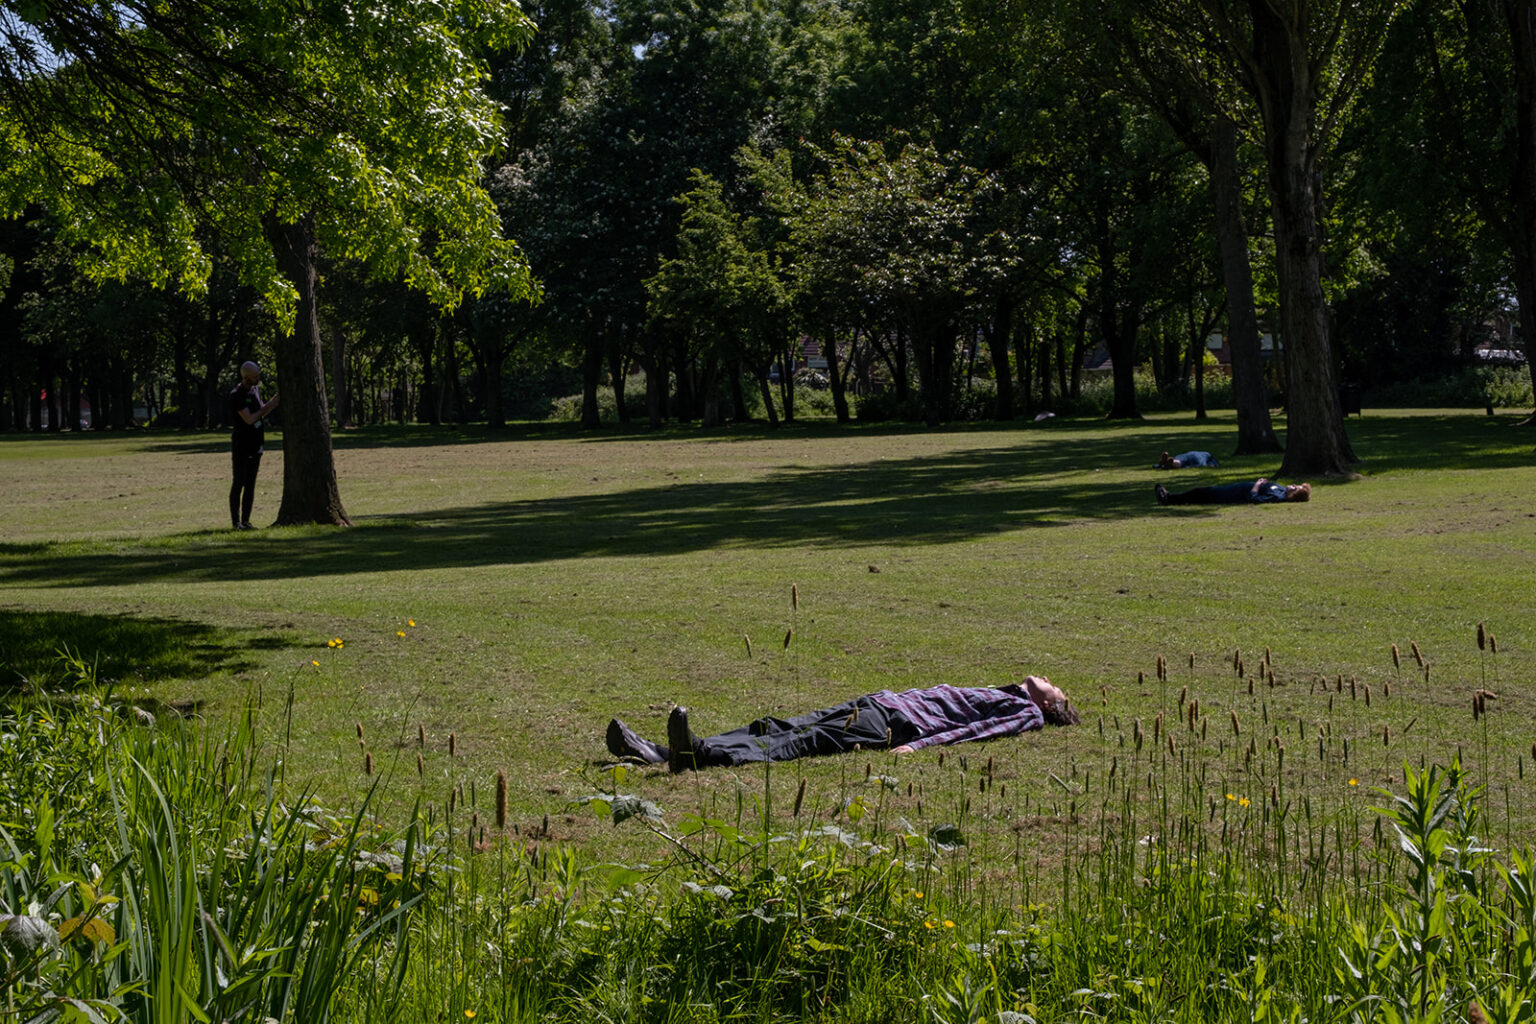 A photograph of a grassy clearing in a park with someone lying on the ground.